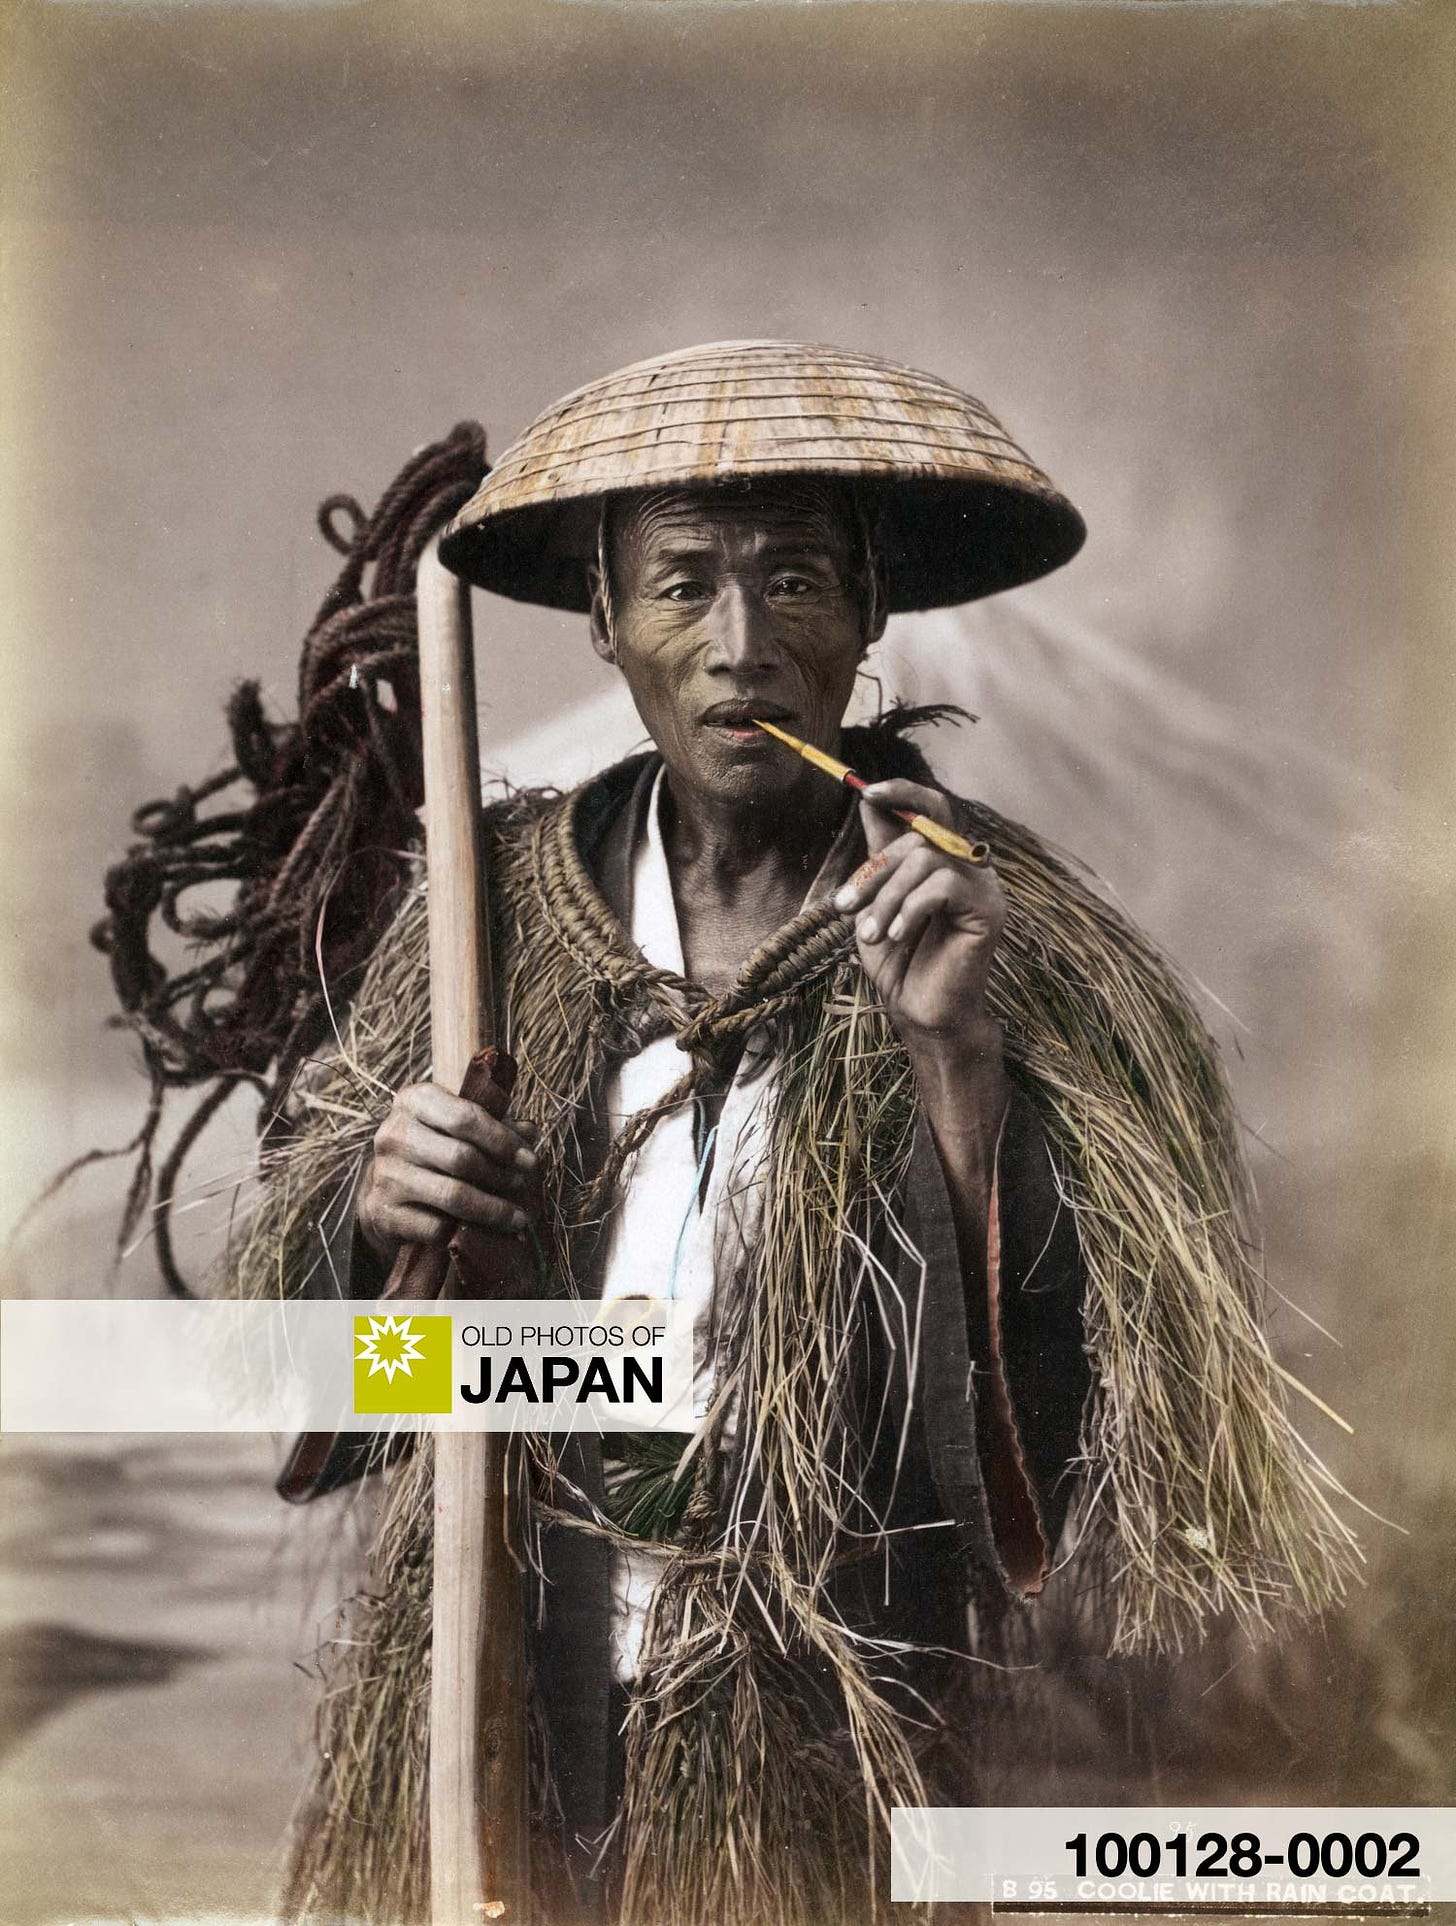 Japanese Farmer with pipe, wearing a straw raincoat and conical hat